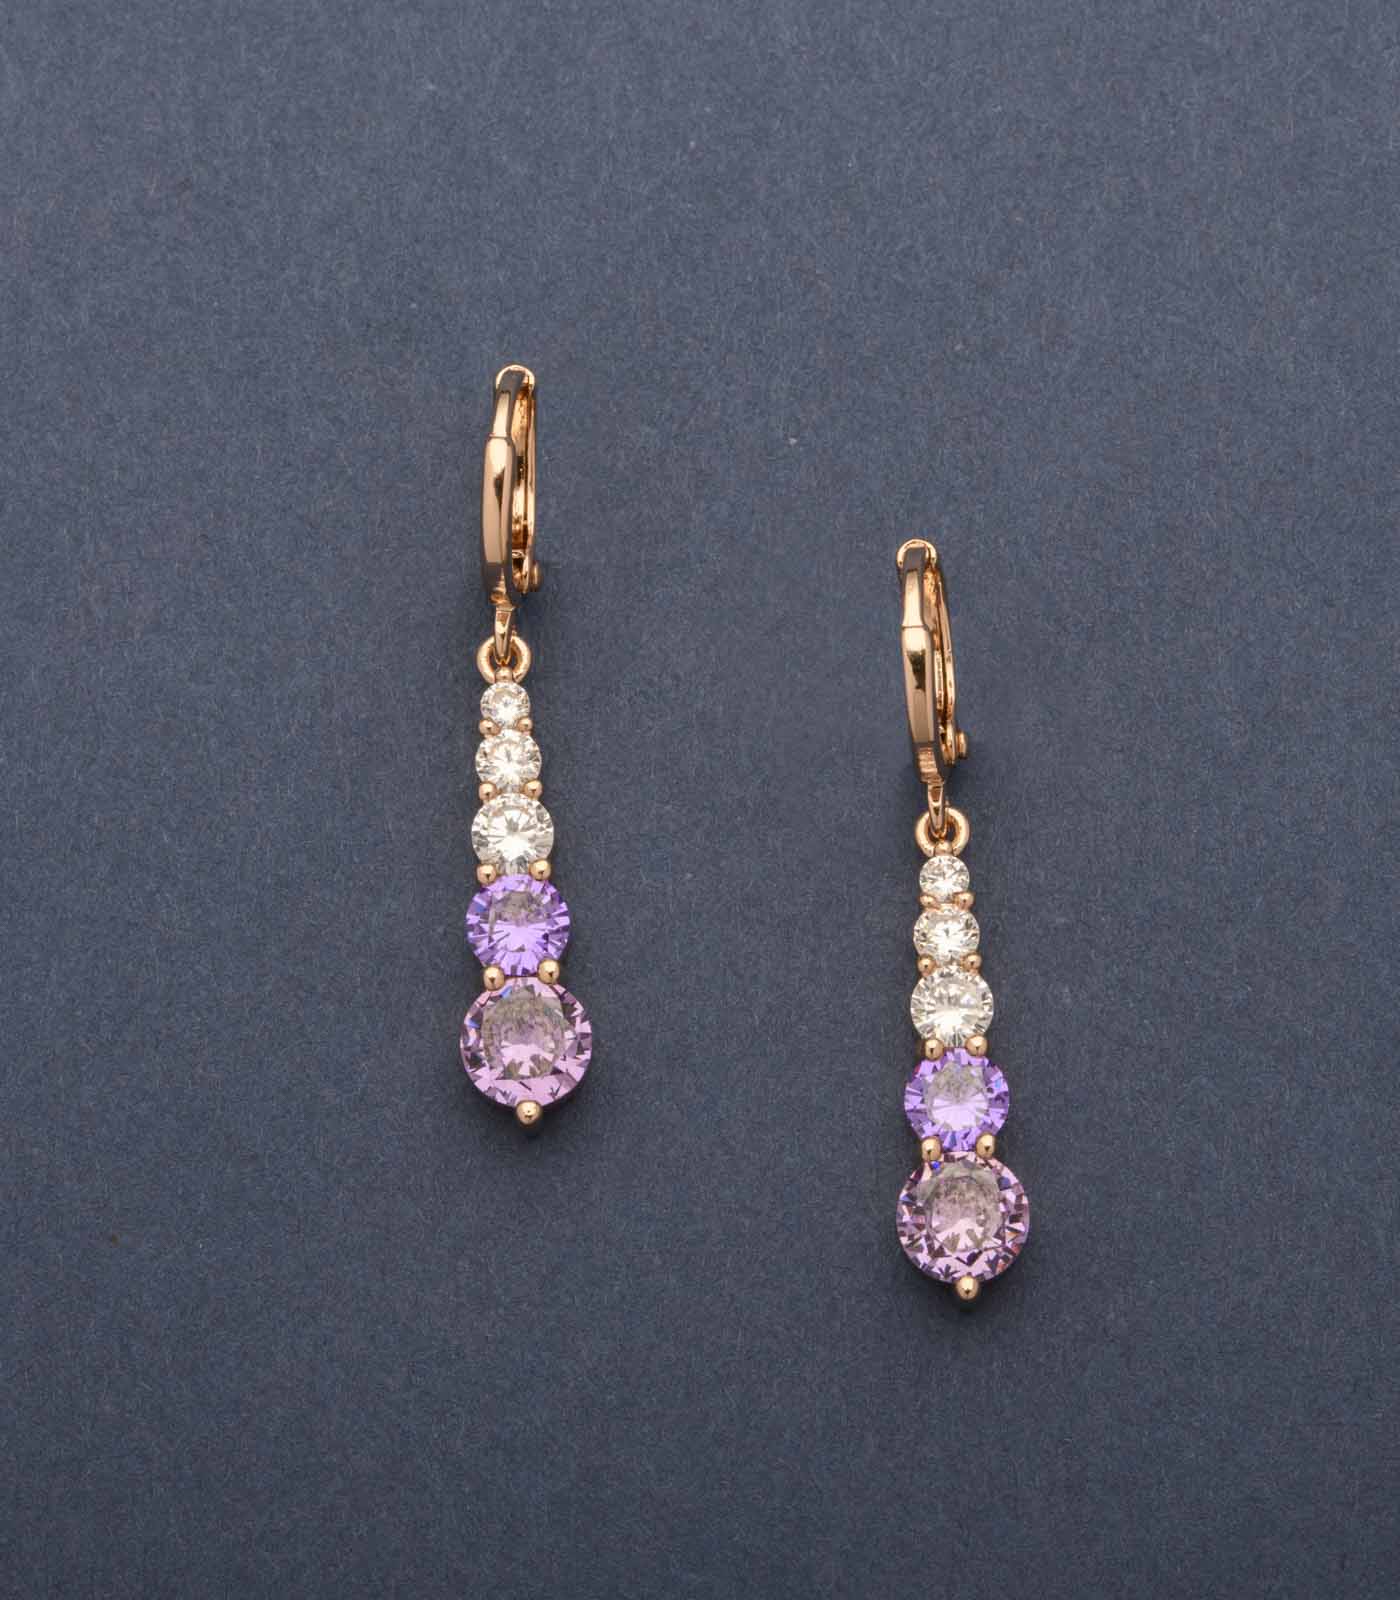 Decorative Trail Of The Shiny Purple Stones Earrings (Brass)